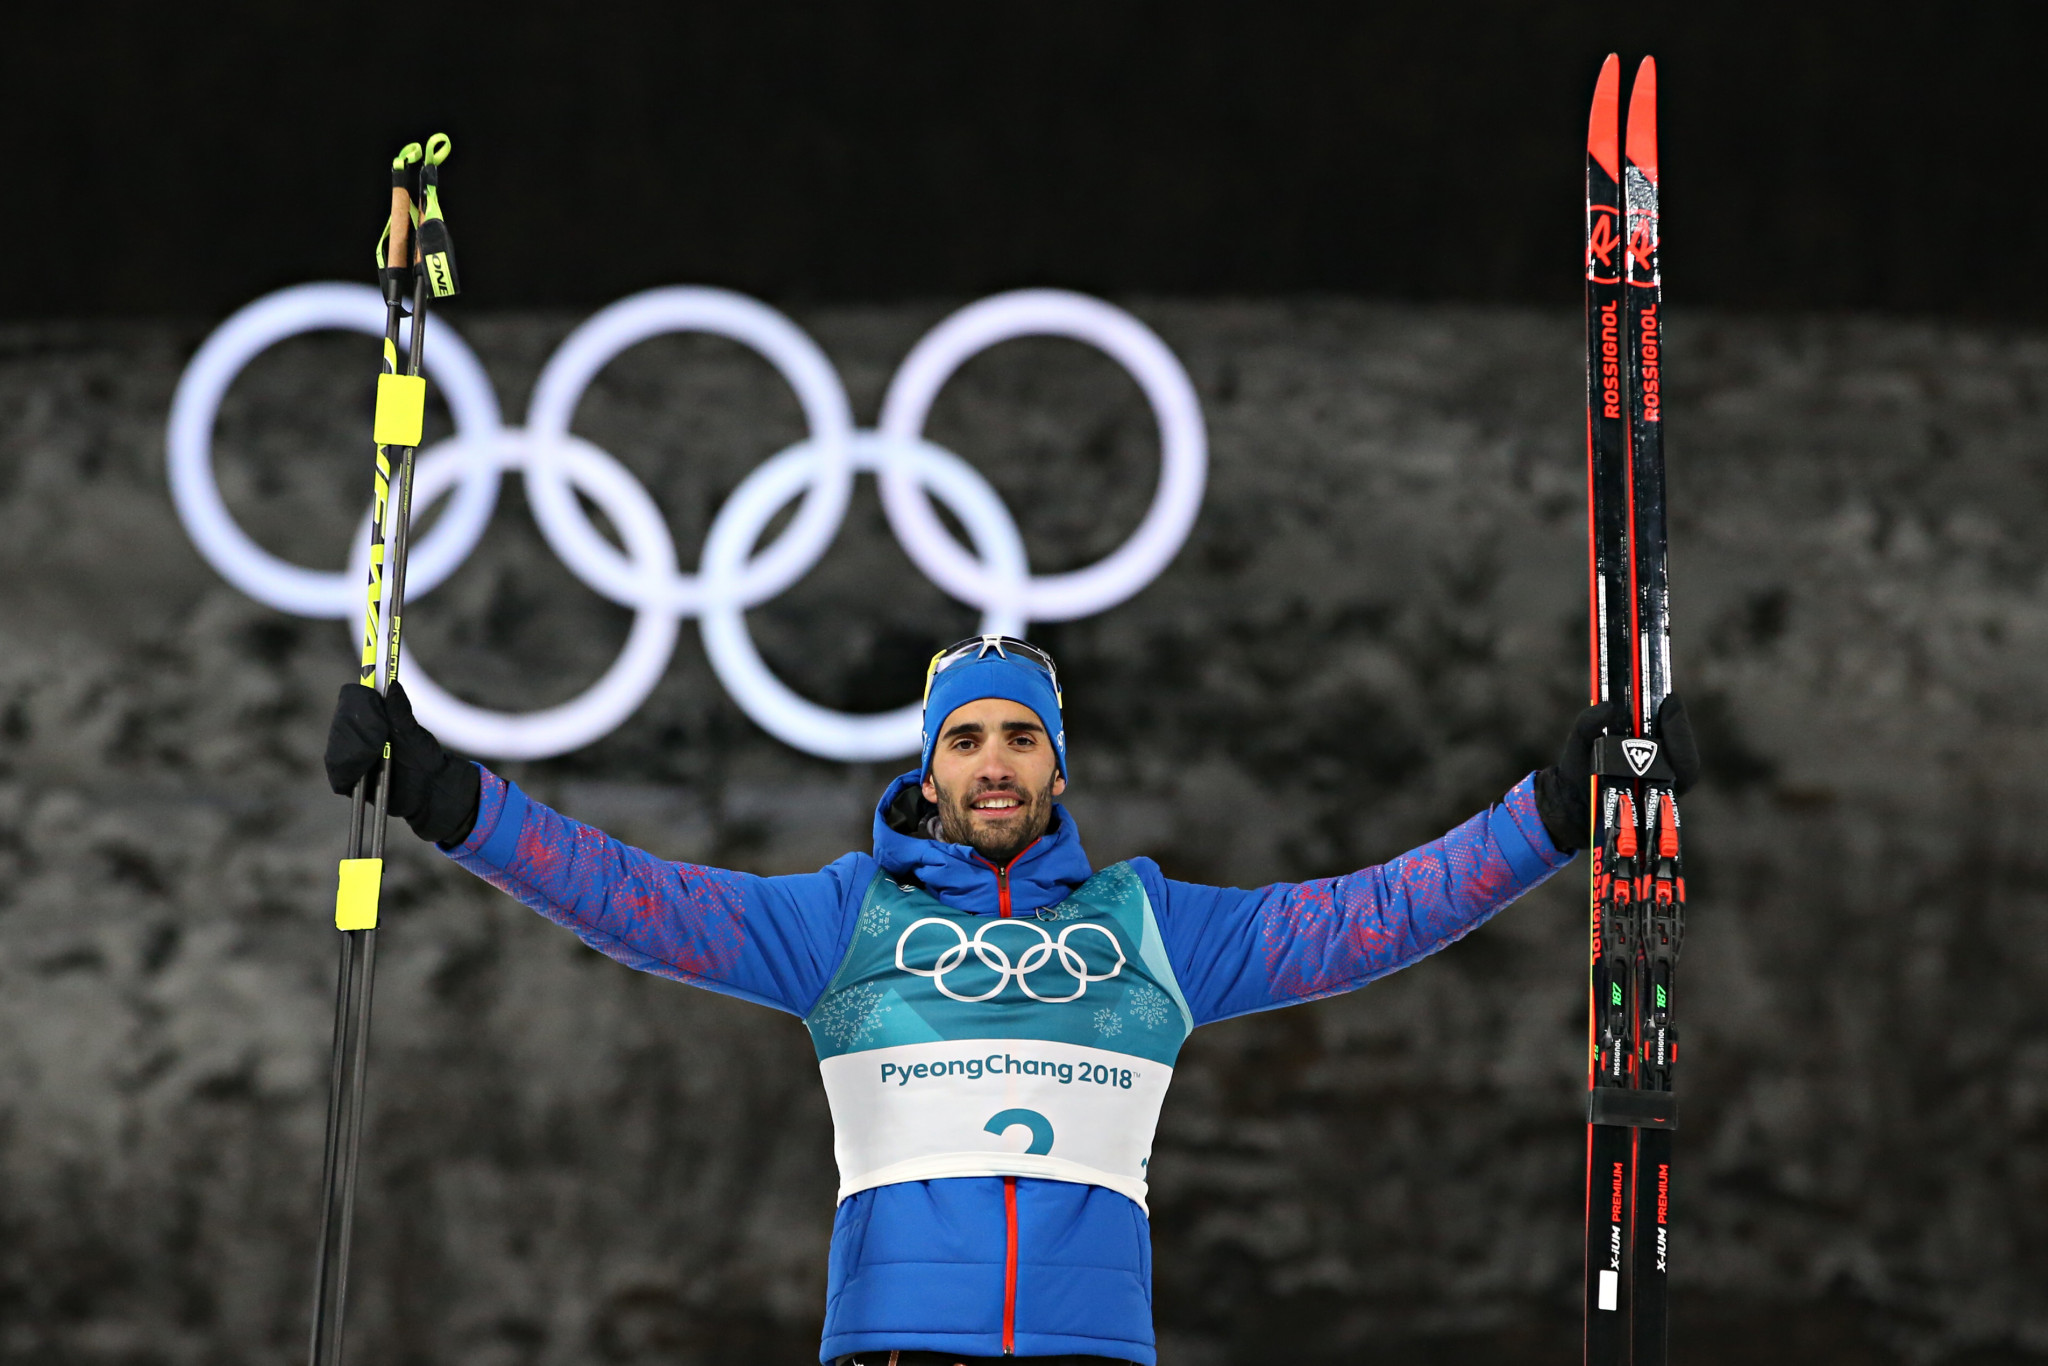 Martin Fourcade has now won four Olympic gold medals, a French record ©Getty Images